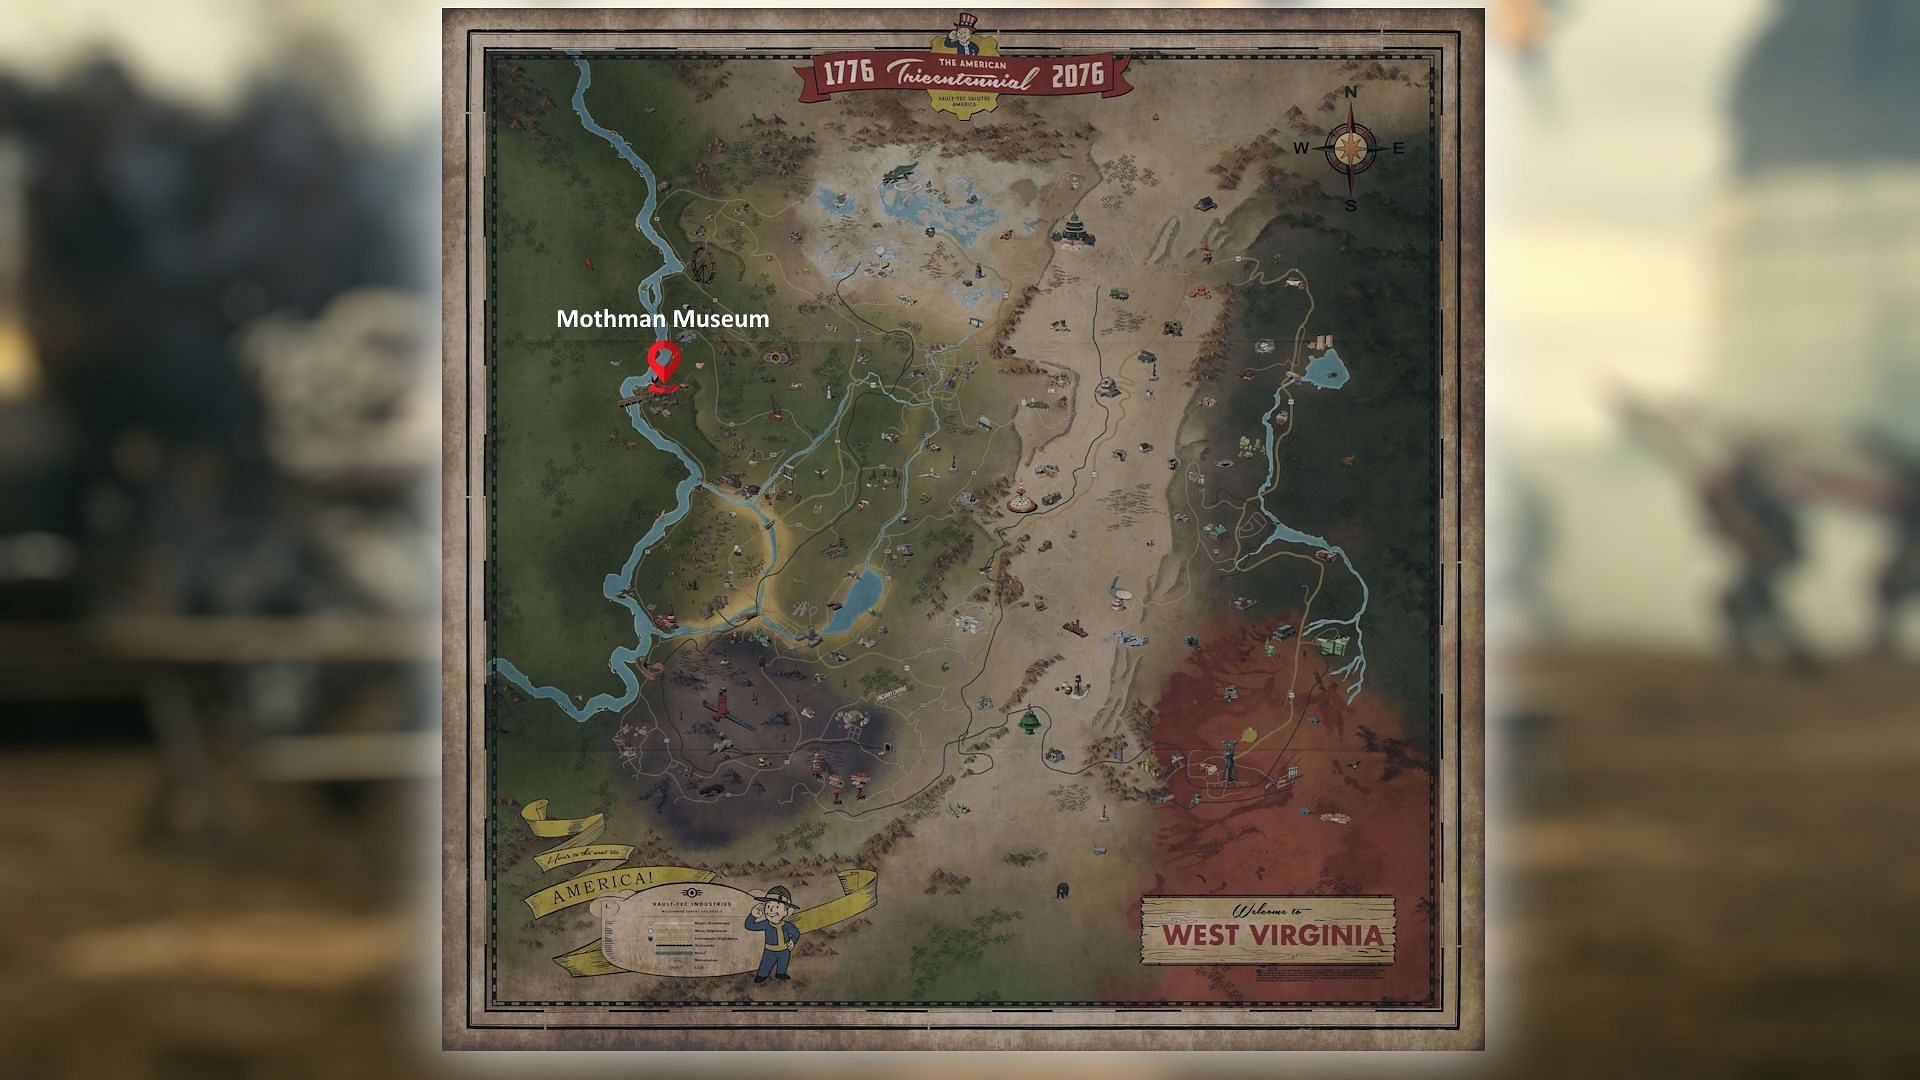 The Mothman Museum is located in the Forest region (Image via Bethesda Game Studios)